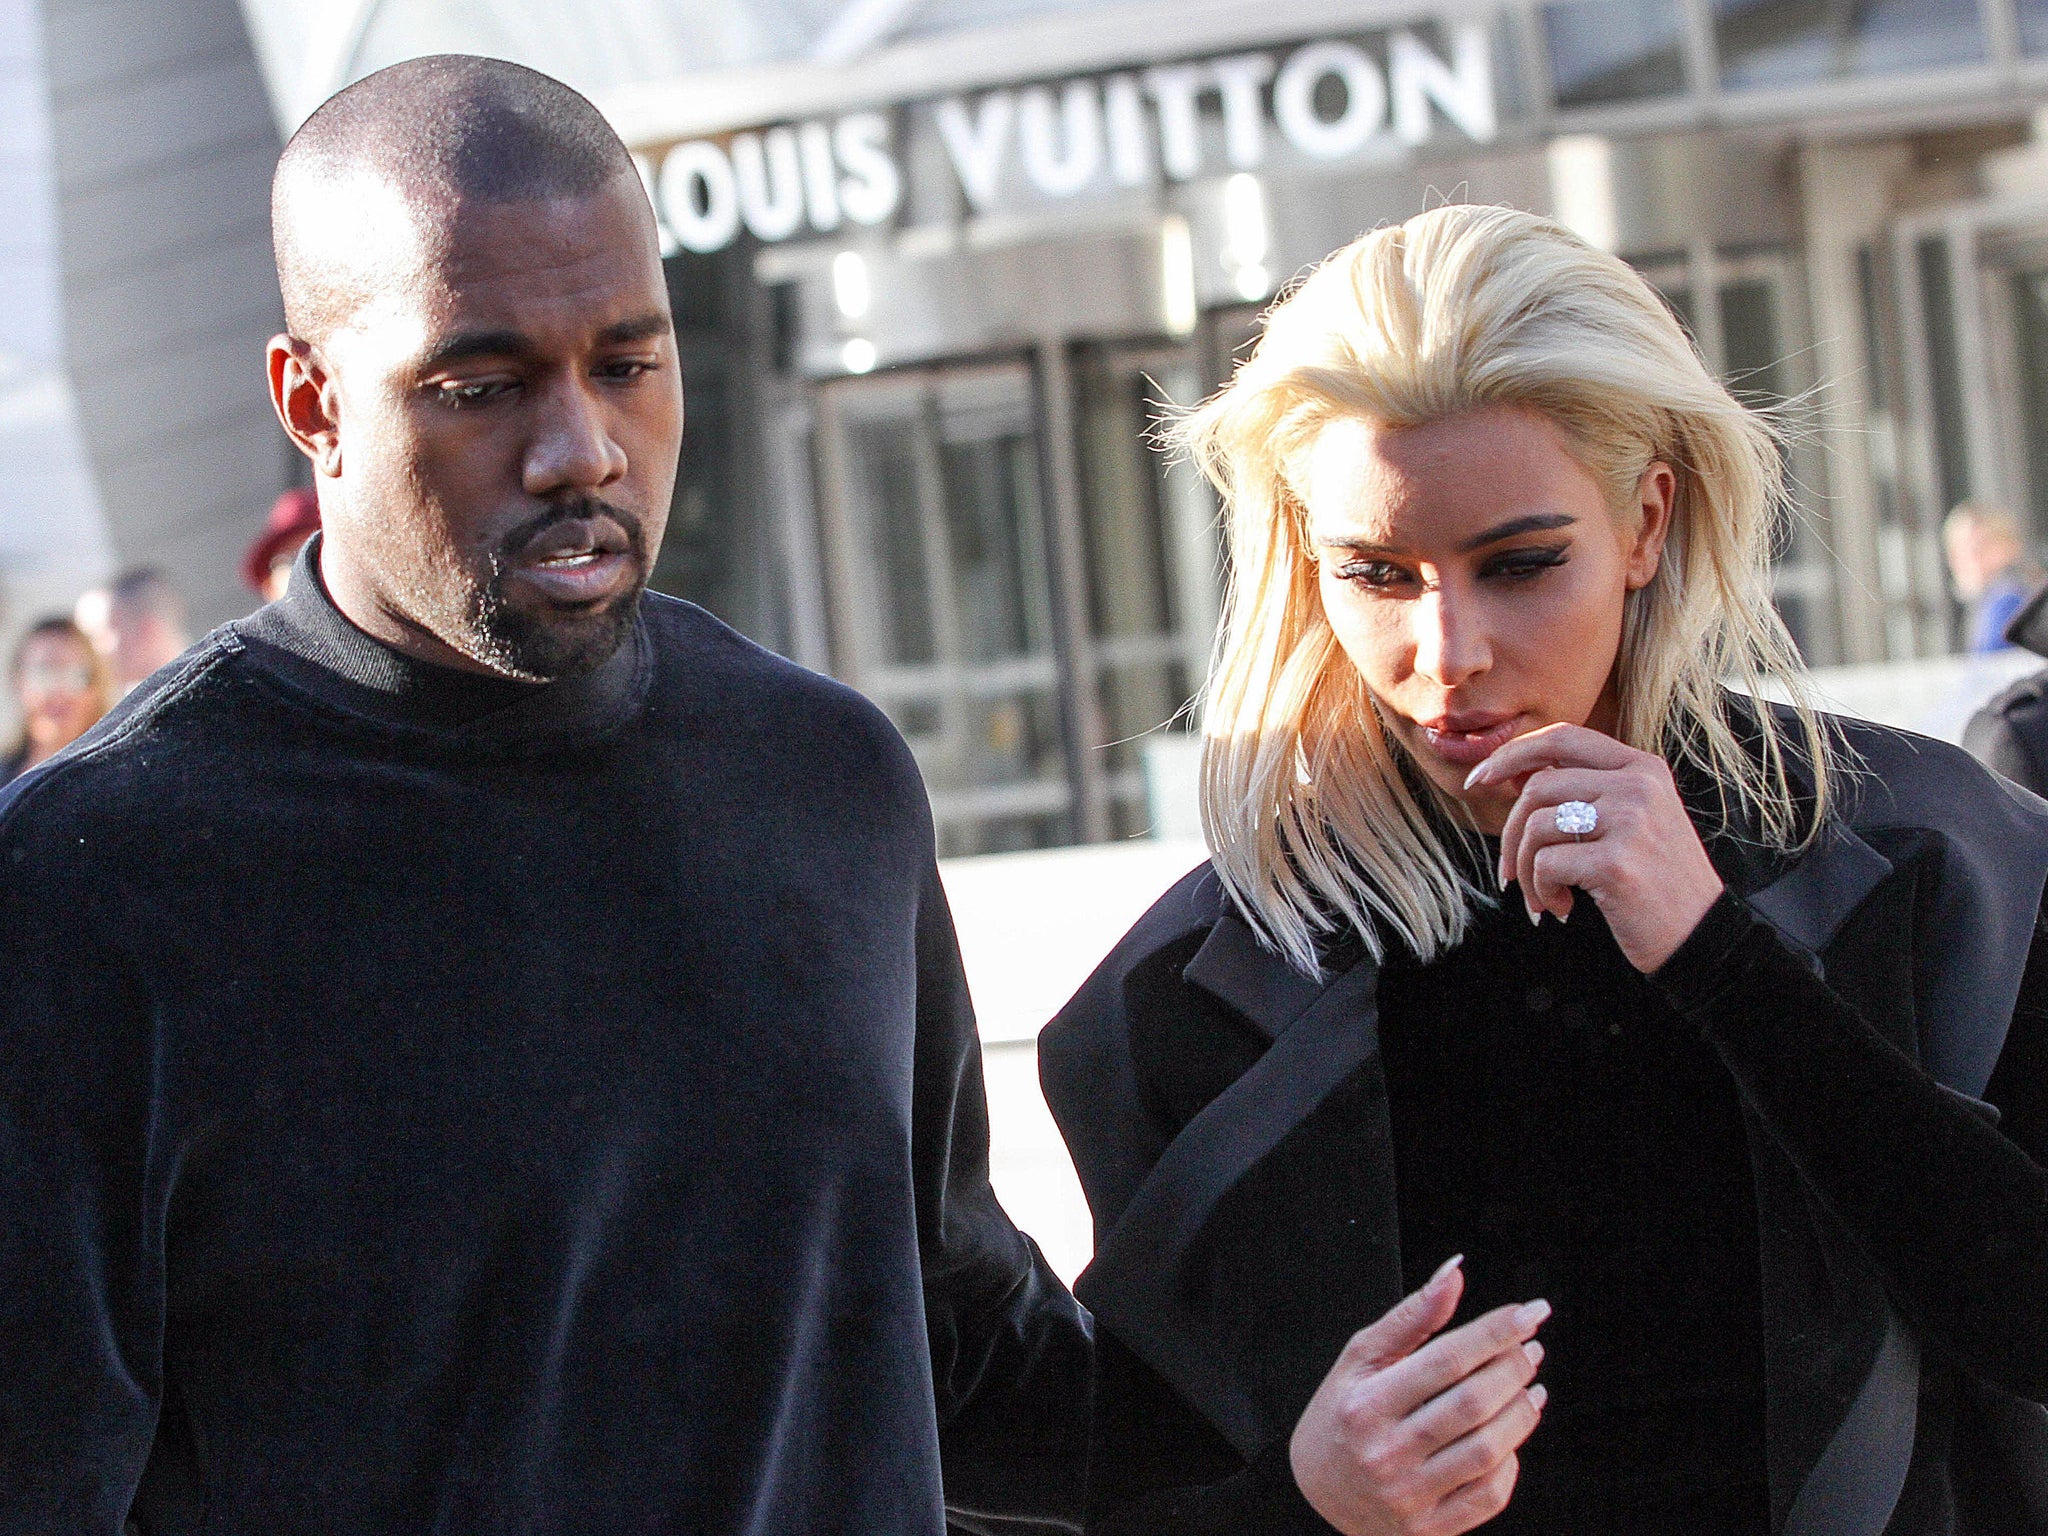 Is Kanye West collaborating with Louis Vuitton? | The Independent